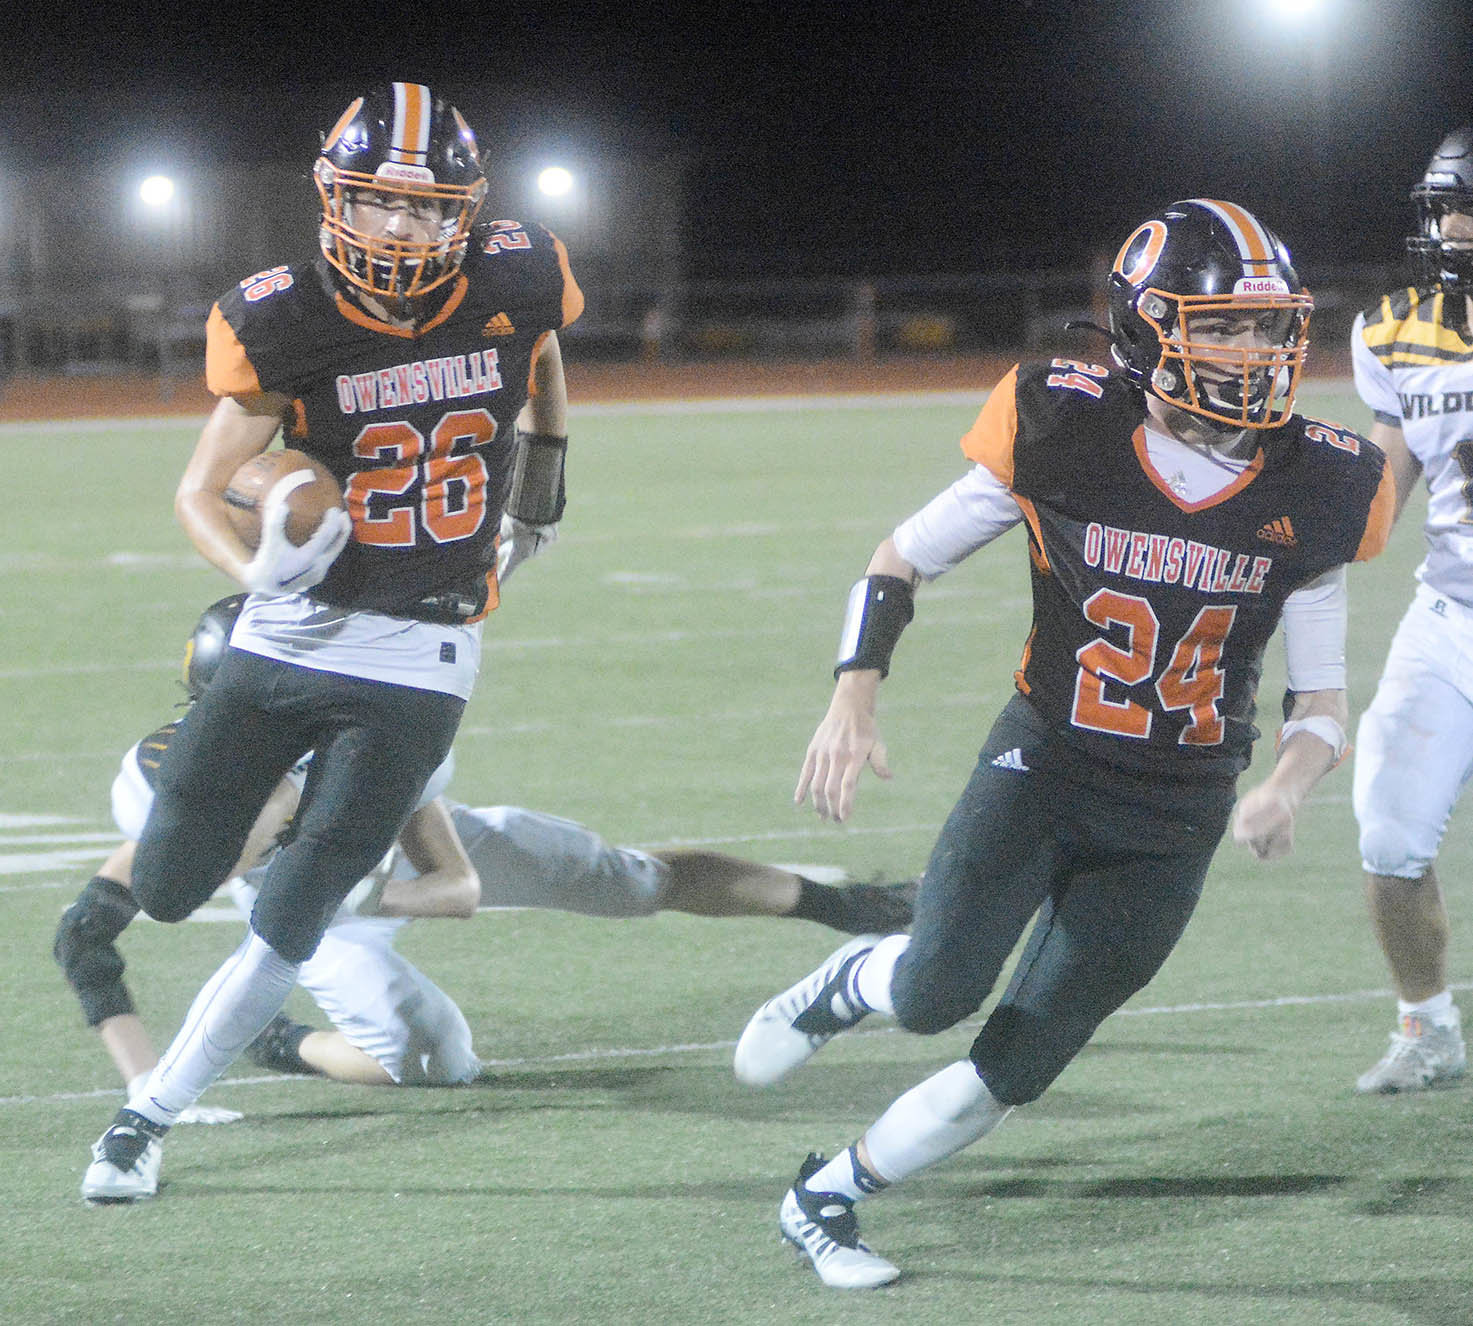 Bryce Payne (left) runs the football with teammate Tanner Meyer out in front of him during Owensville’s 50-0 season-opening victory over Cuba’s Wildcats at Dutchmen Field back in late August. All three gridiron football players were recently named to their All-FRC football teams as voted on by coaches from the Four Rivers Conference (FRC).